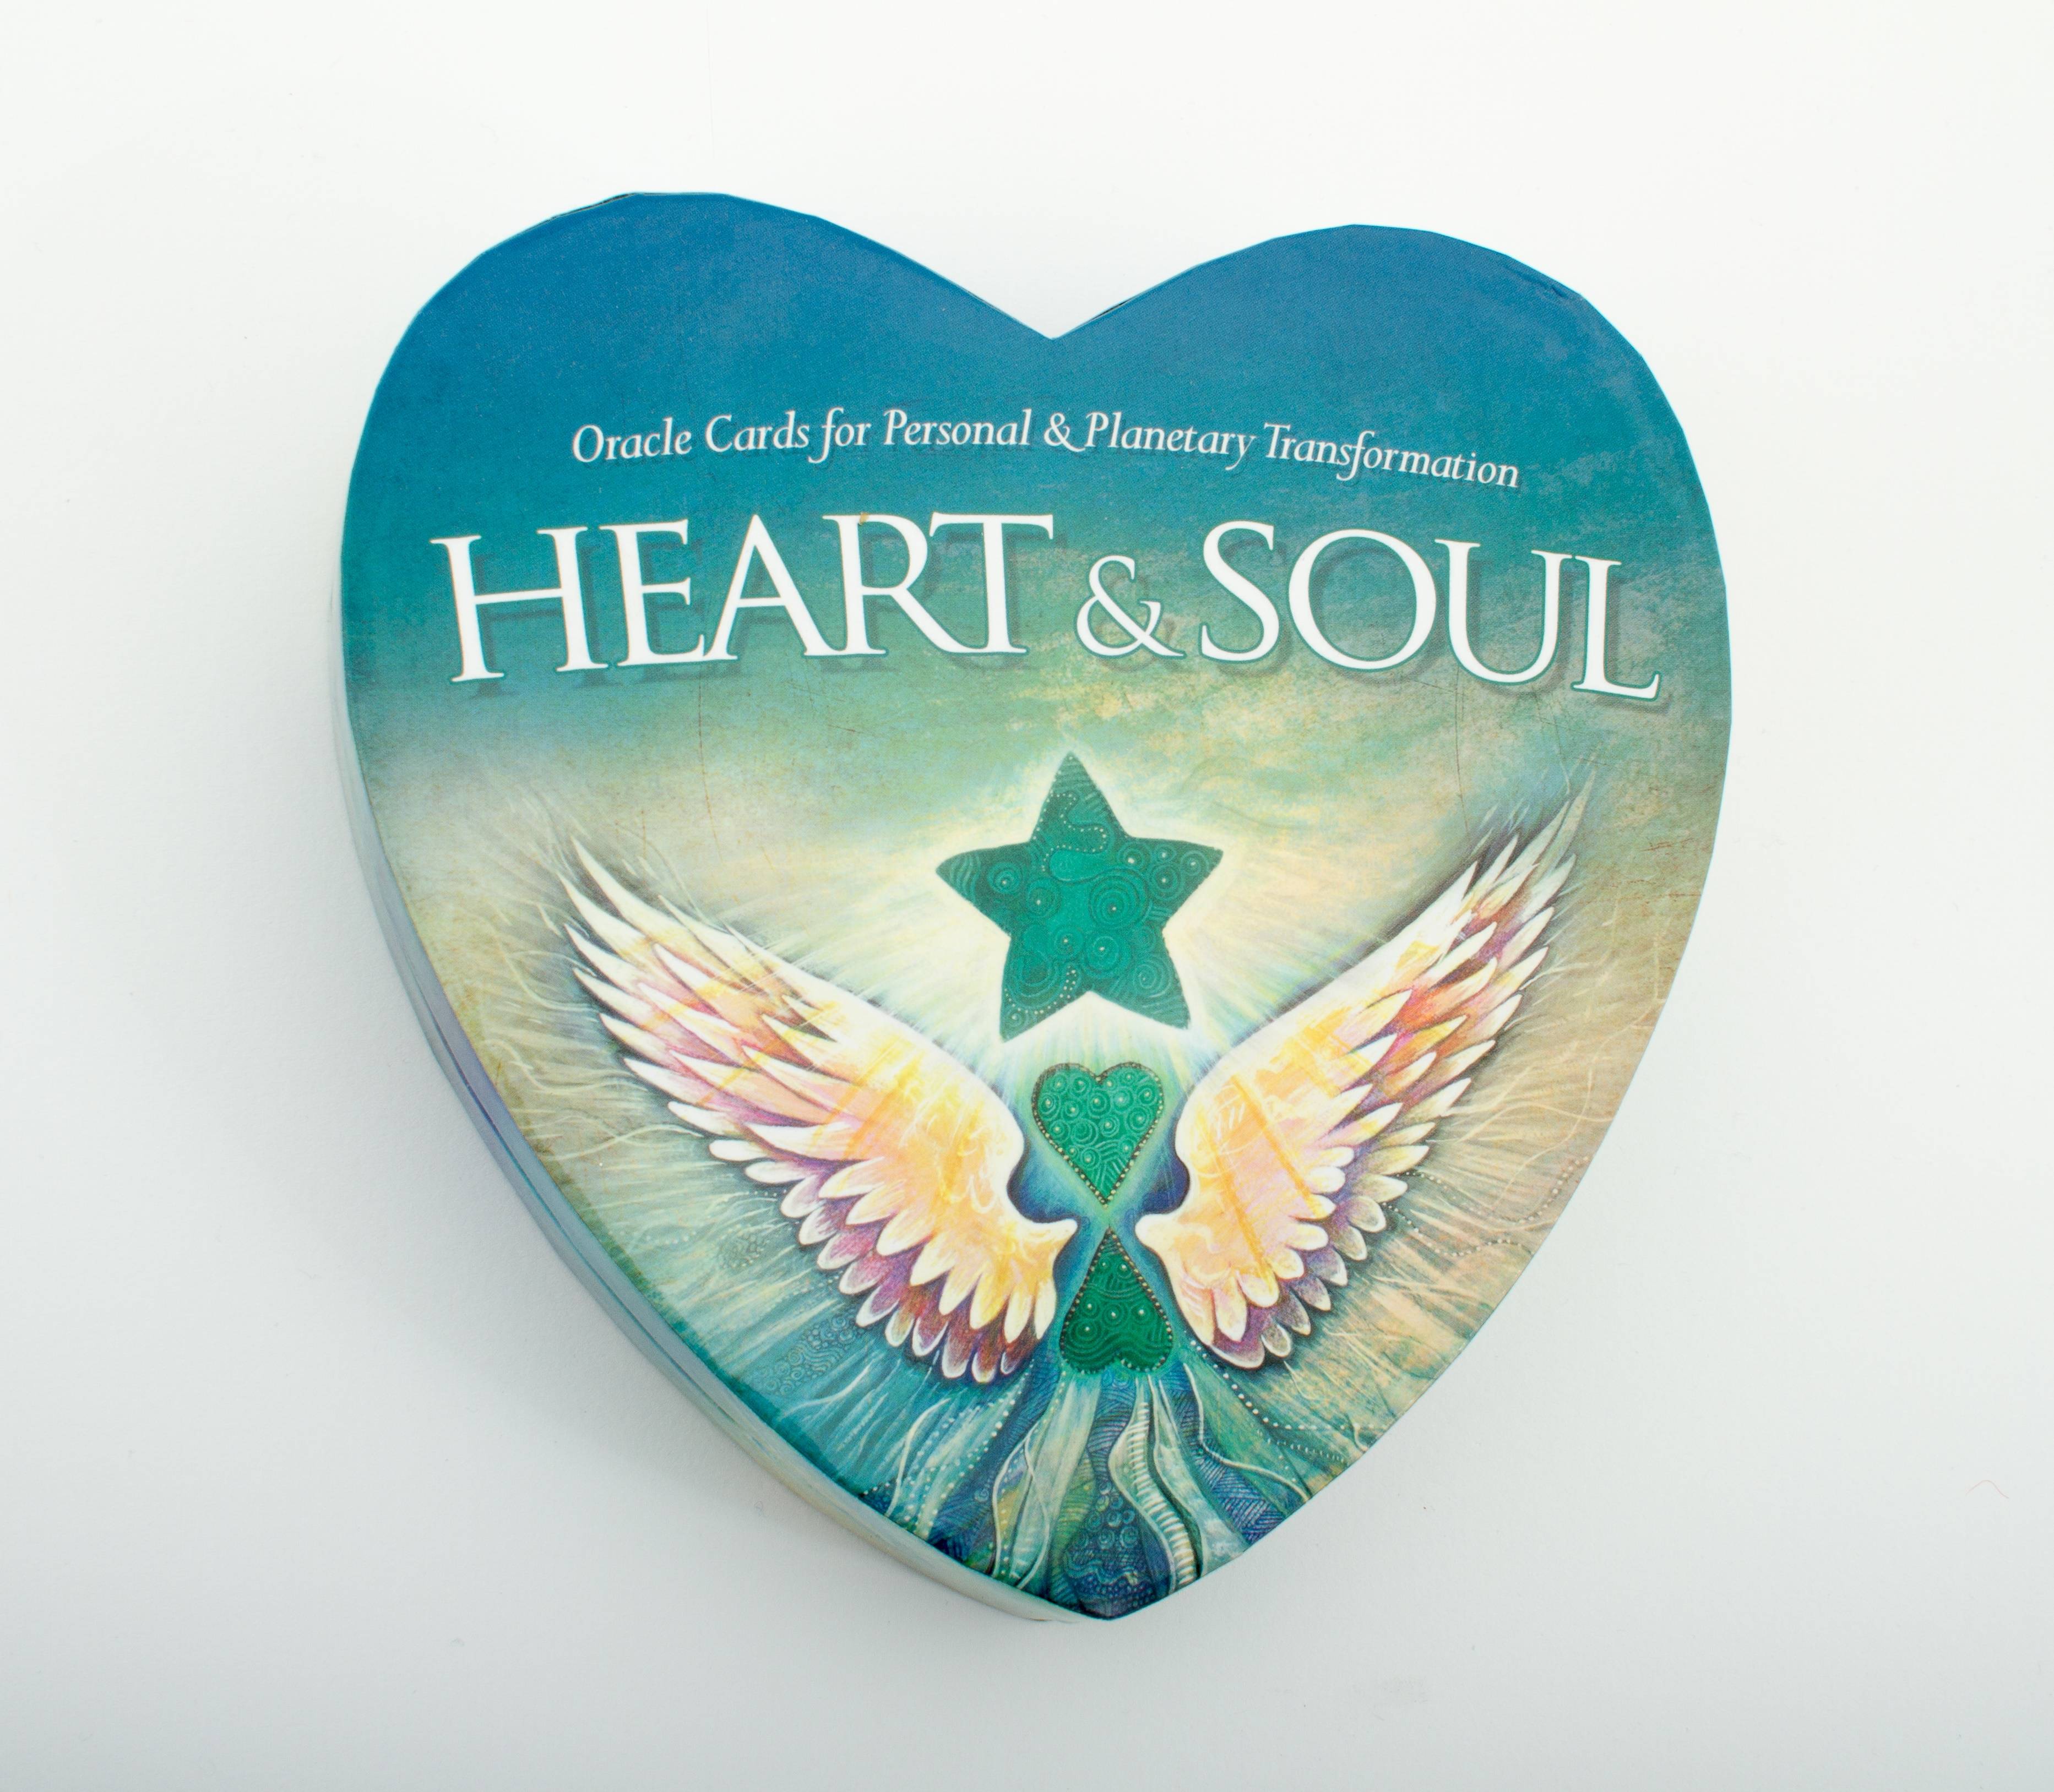 Heart & Soul Cards (54 Heart Shaped Cards In A Heart Shaped Box)